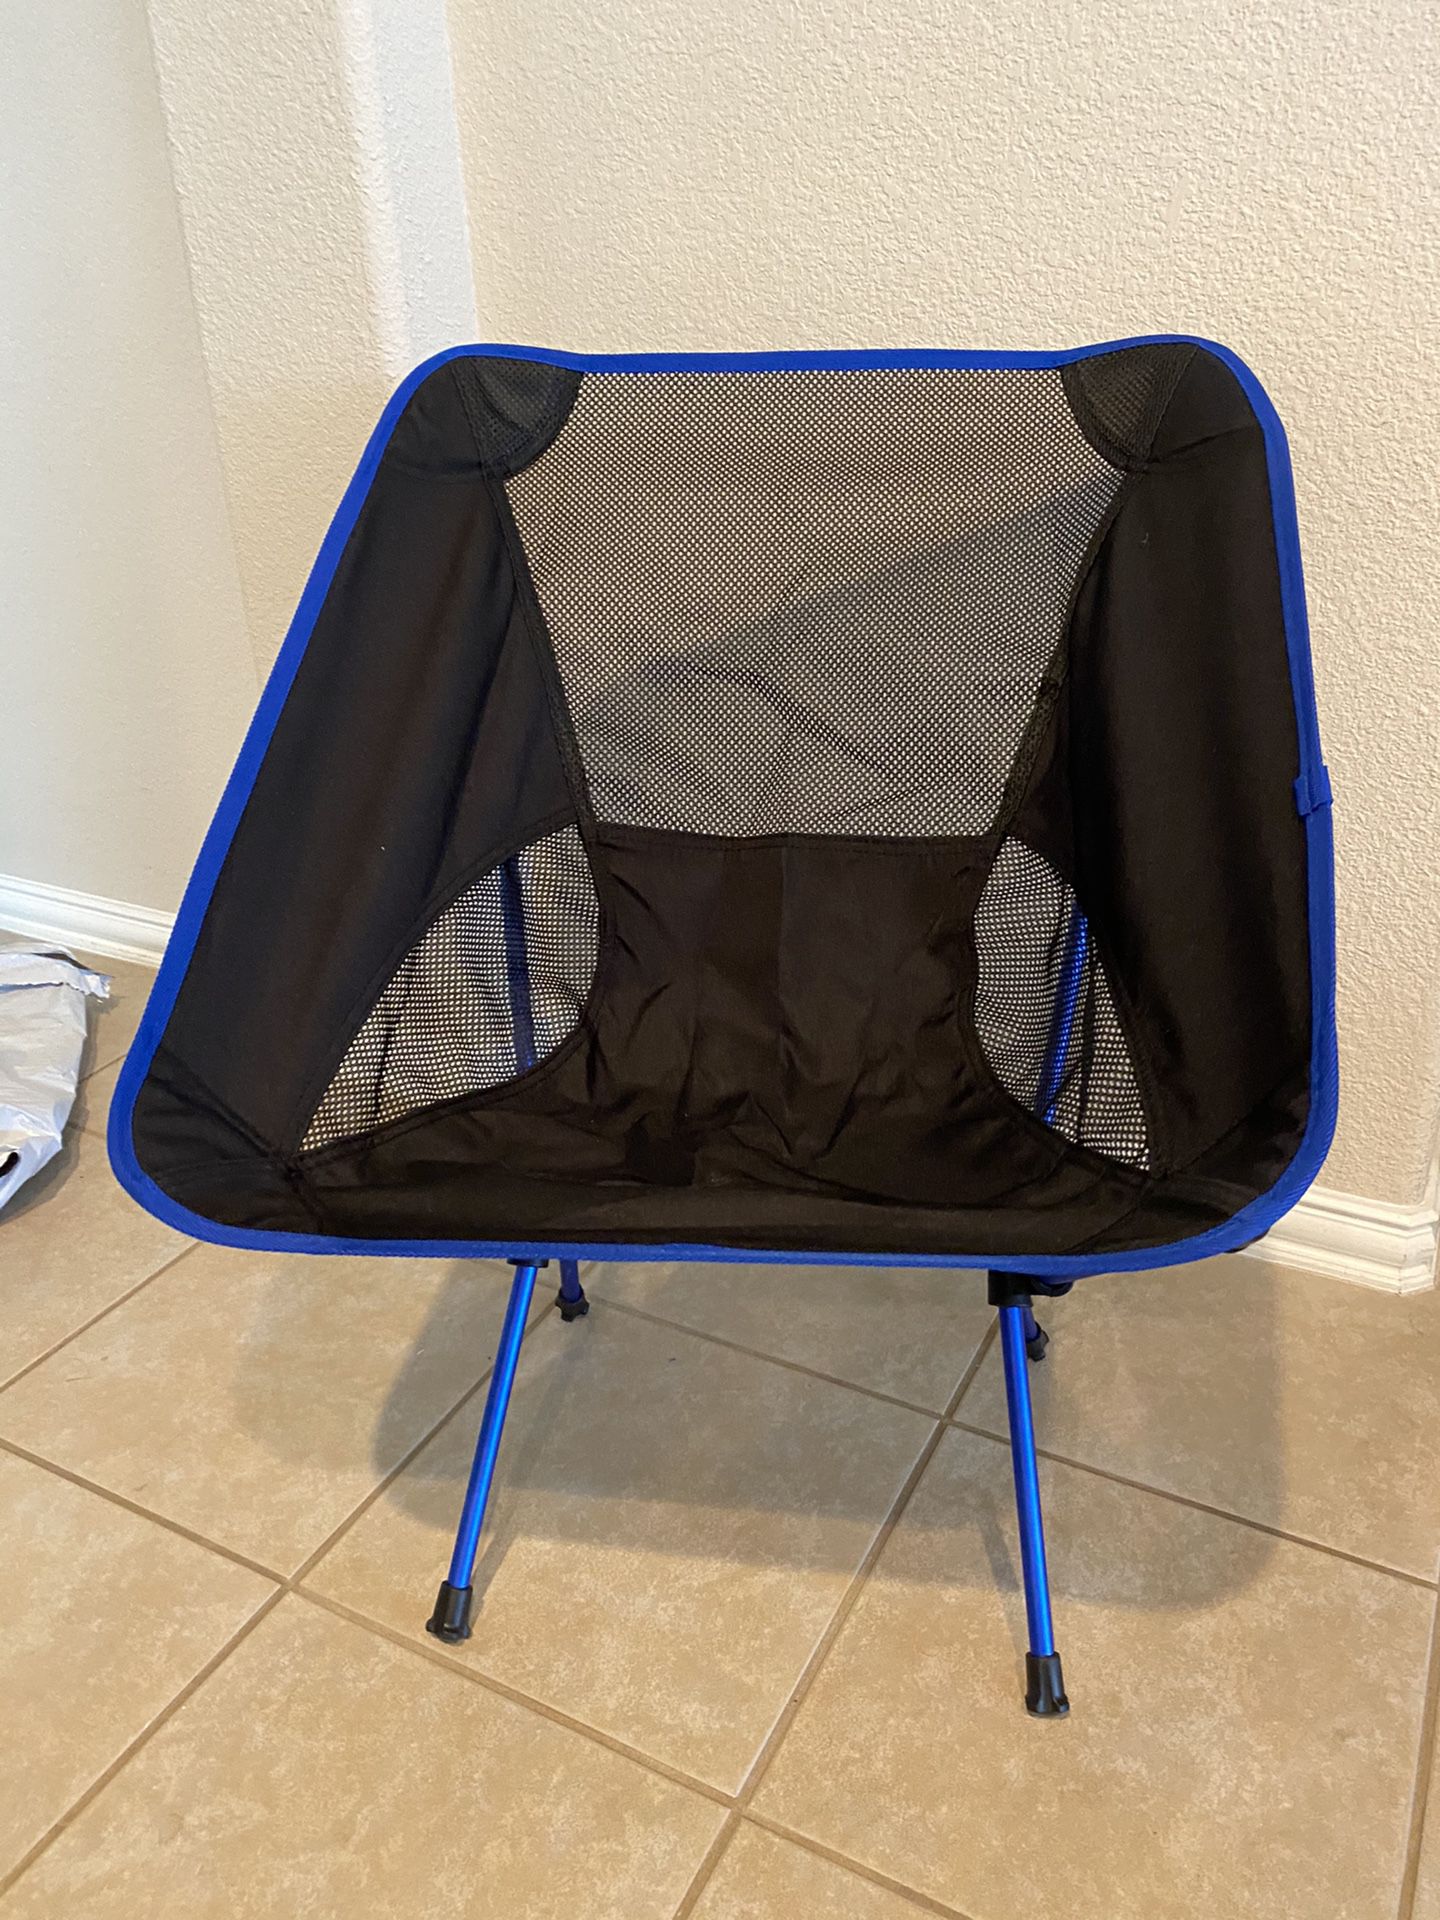 Ultra portable folding camp chair (2 available)